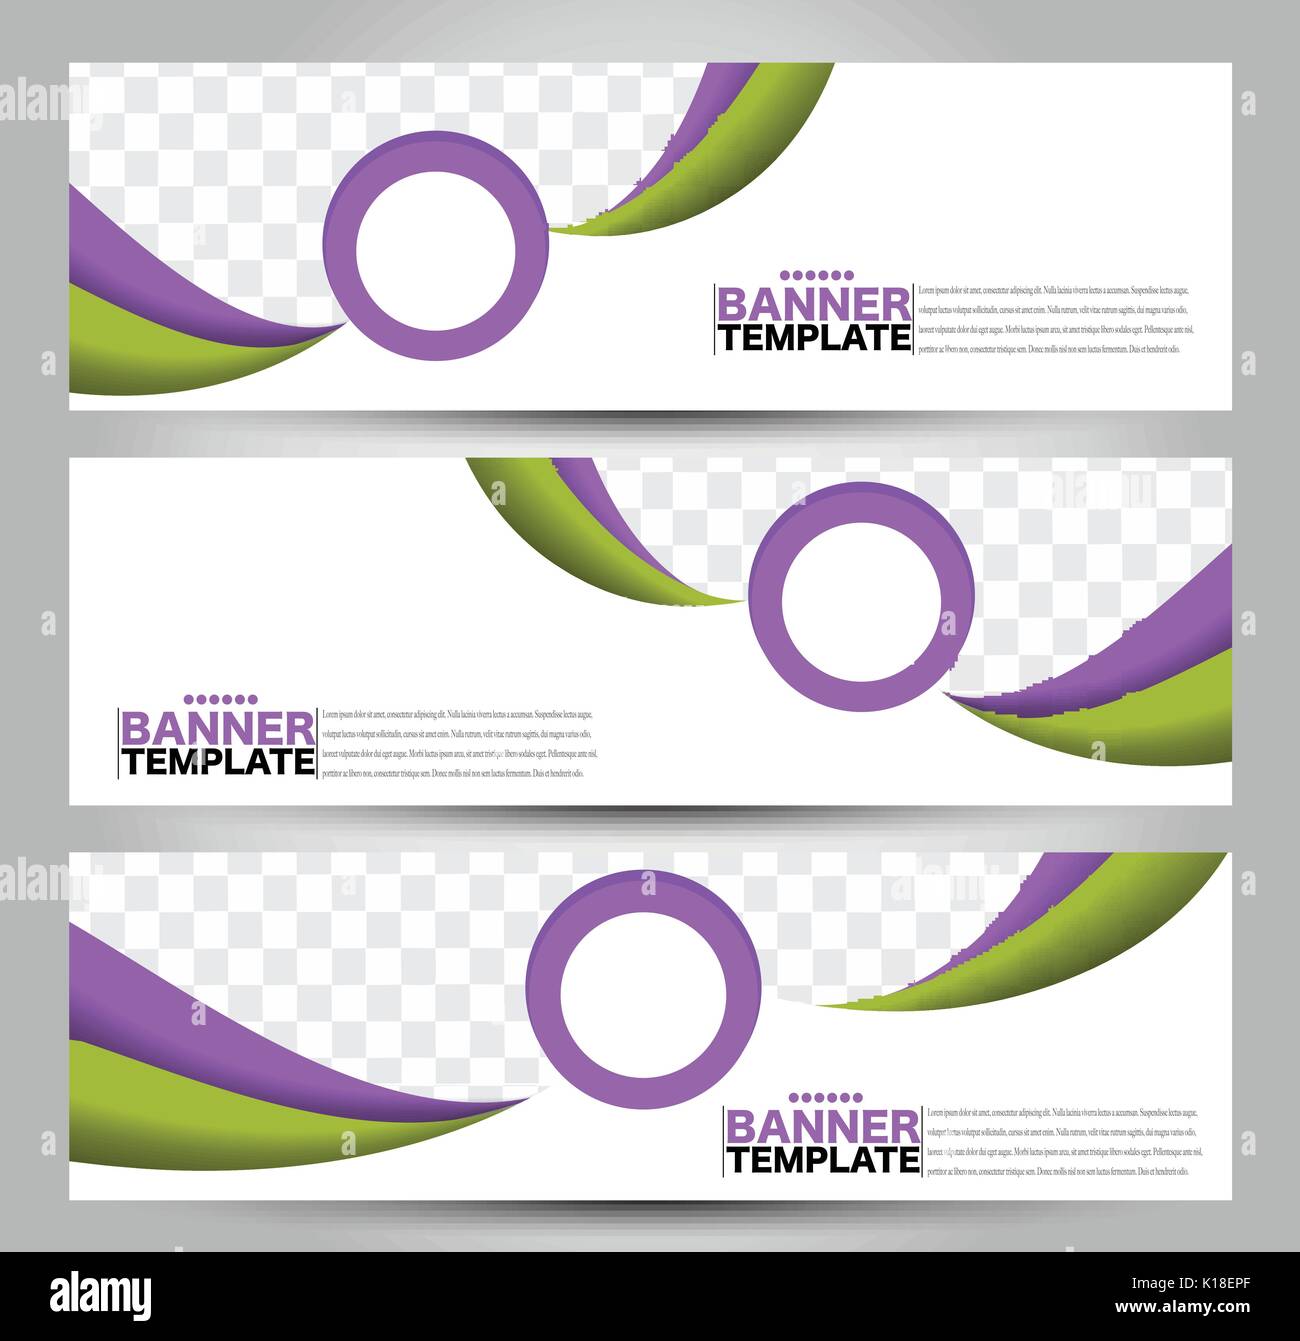 Banner Template Abstract Background For Design Business Stock Vector Image Art Alamy